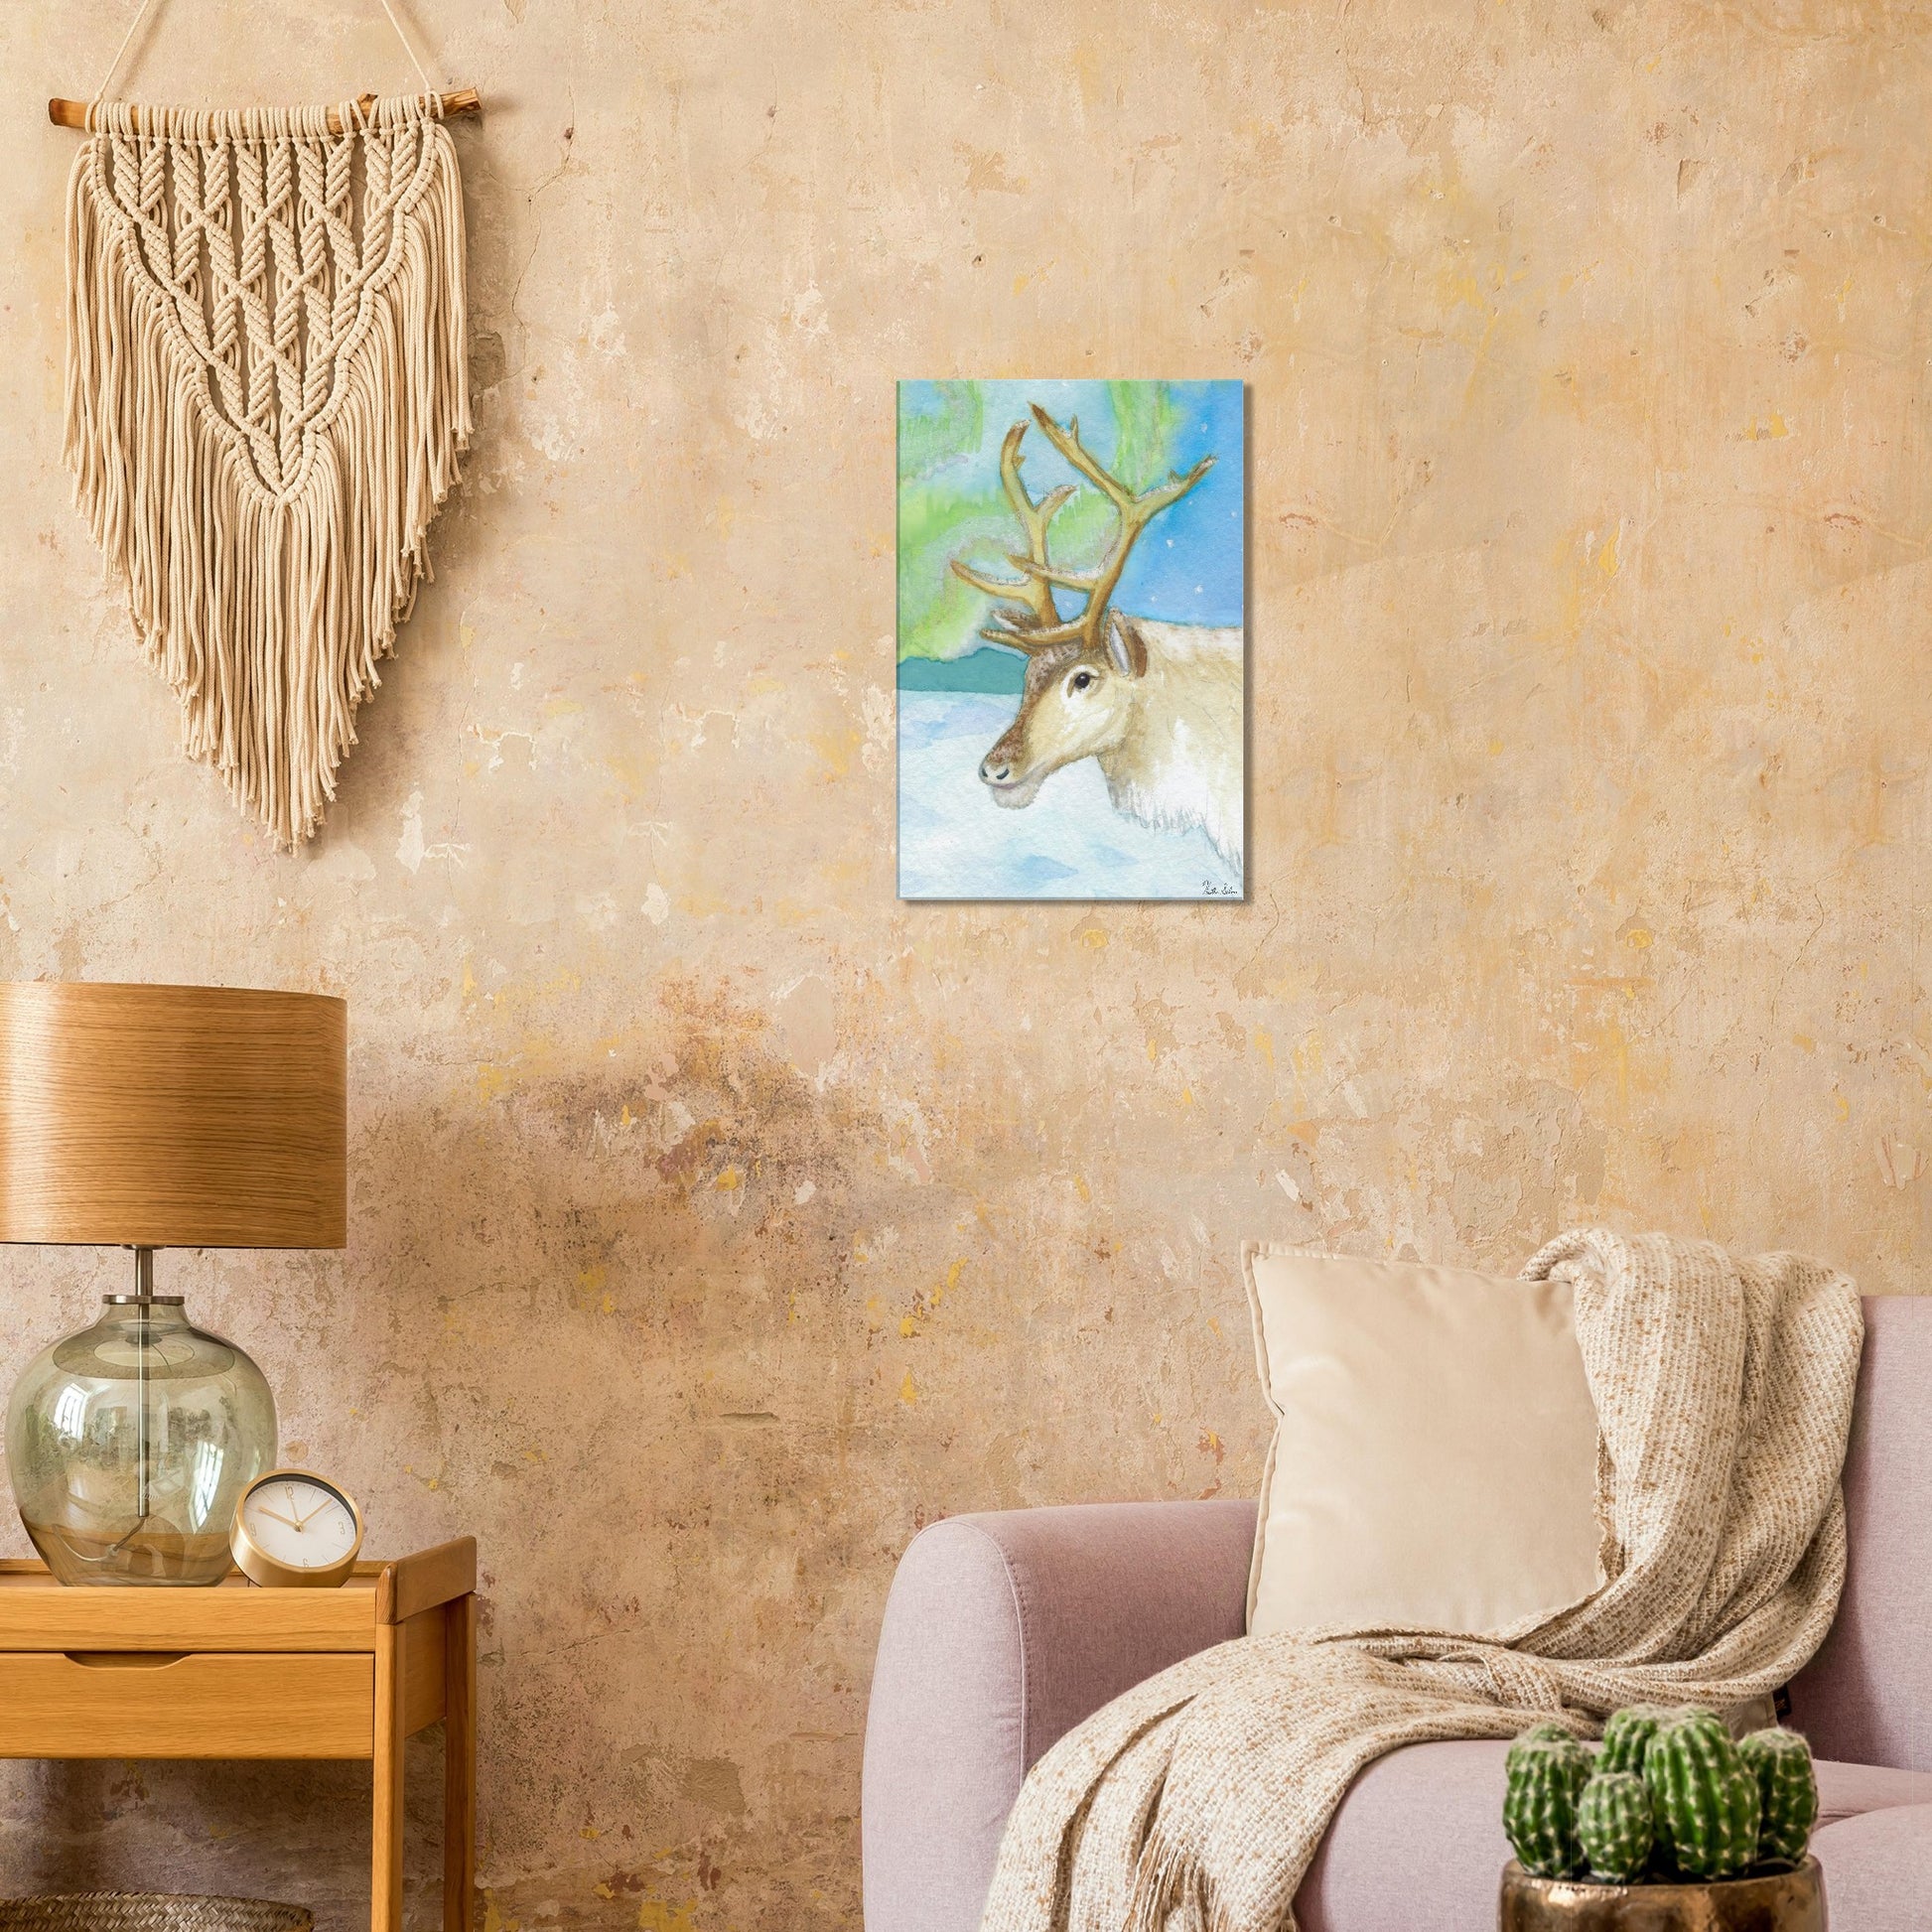 16 by 24 inch slim canvas print of Heather Silver's watercolor painting, northern lights reindeer. Shown on beige wall by macramé above pink sofa and wooden end table with lamp.